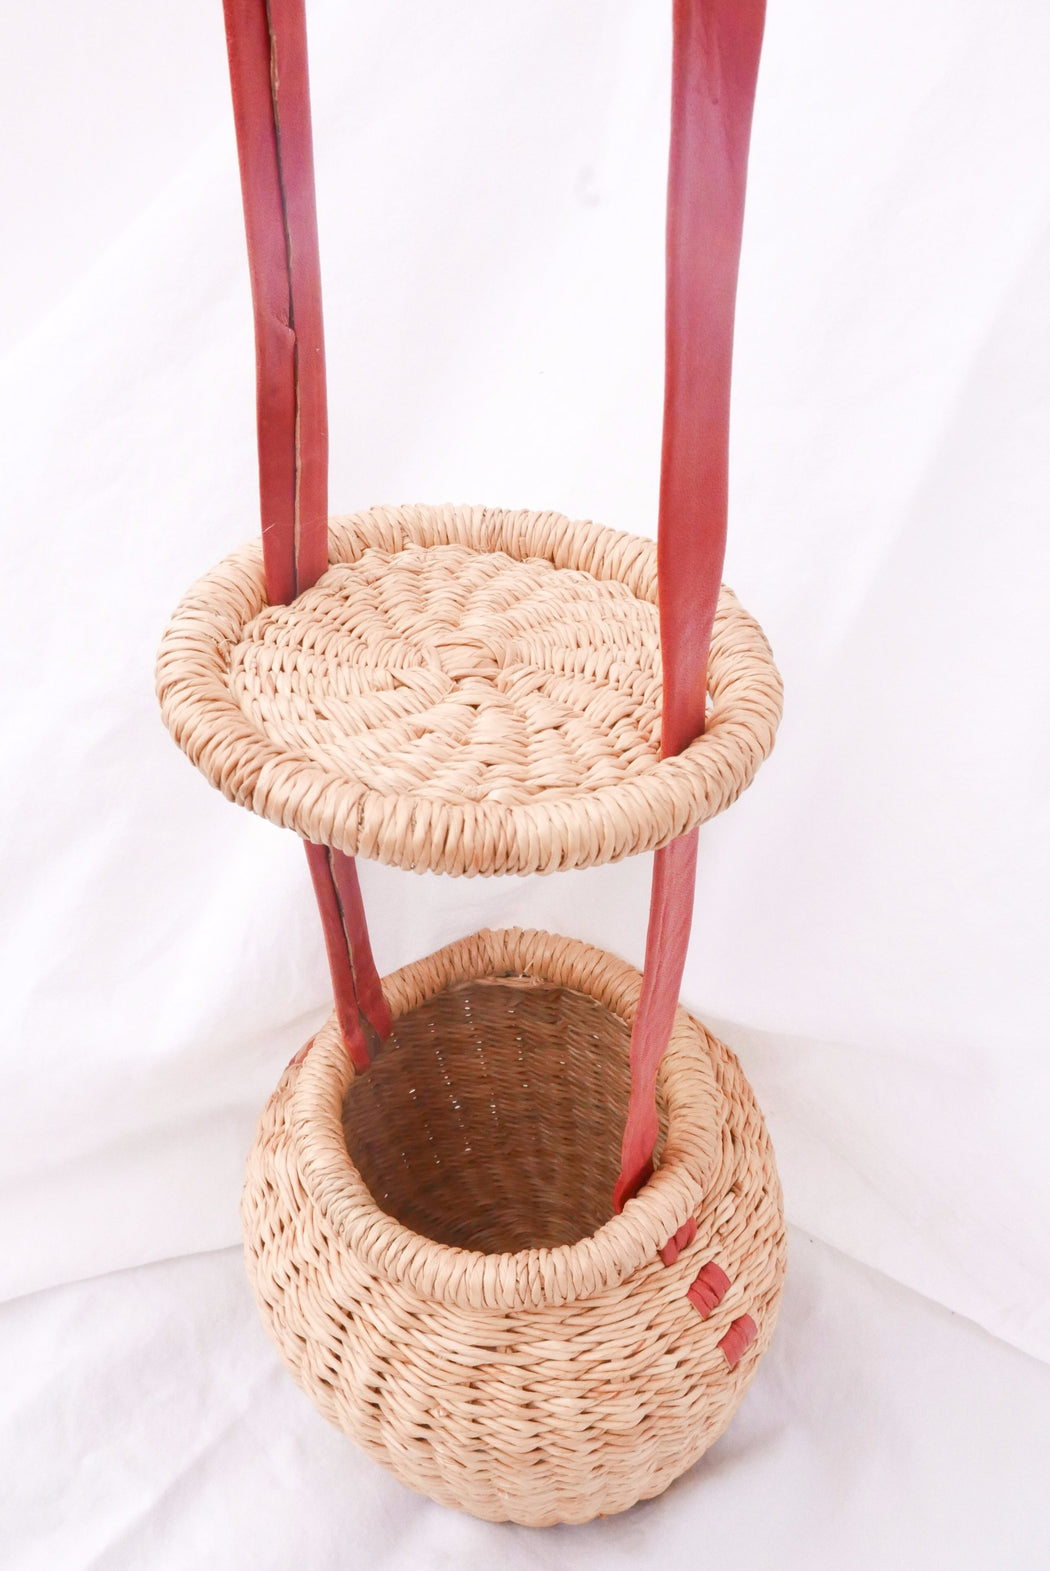 The natural Alobahe handbag is handwoven with straw called Kinkahe in Sherigu, Ghana. The shape is versatile and opens from the lid lifted vertical with an adjustable leather strap that can be worn as a crossbody or a handheld bag. This product supports a community with employment, educational opportunities for the children and improve the work environment.